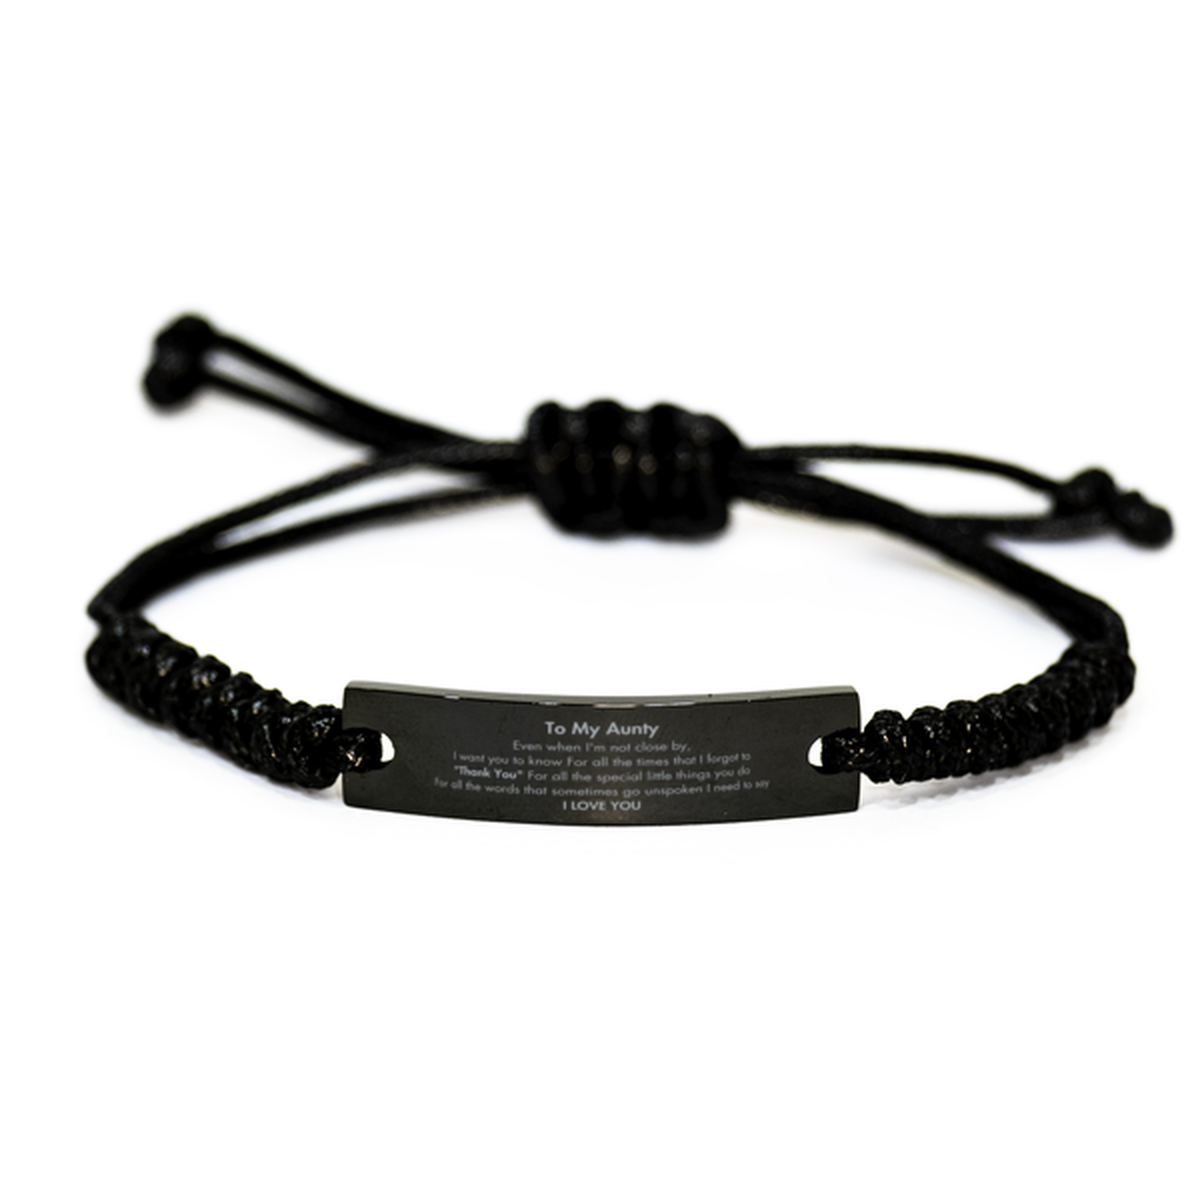 Thank You Gifts for Aunty, Keepsake Black Rope Bracelet Gifts for Aunty Birthday Mother's day Father's Day Aunty For all the words That sometimes go unspoken I need to say I LOVE YOU